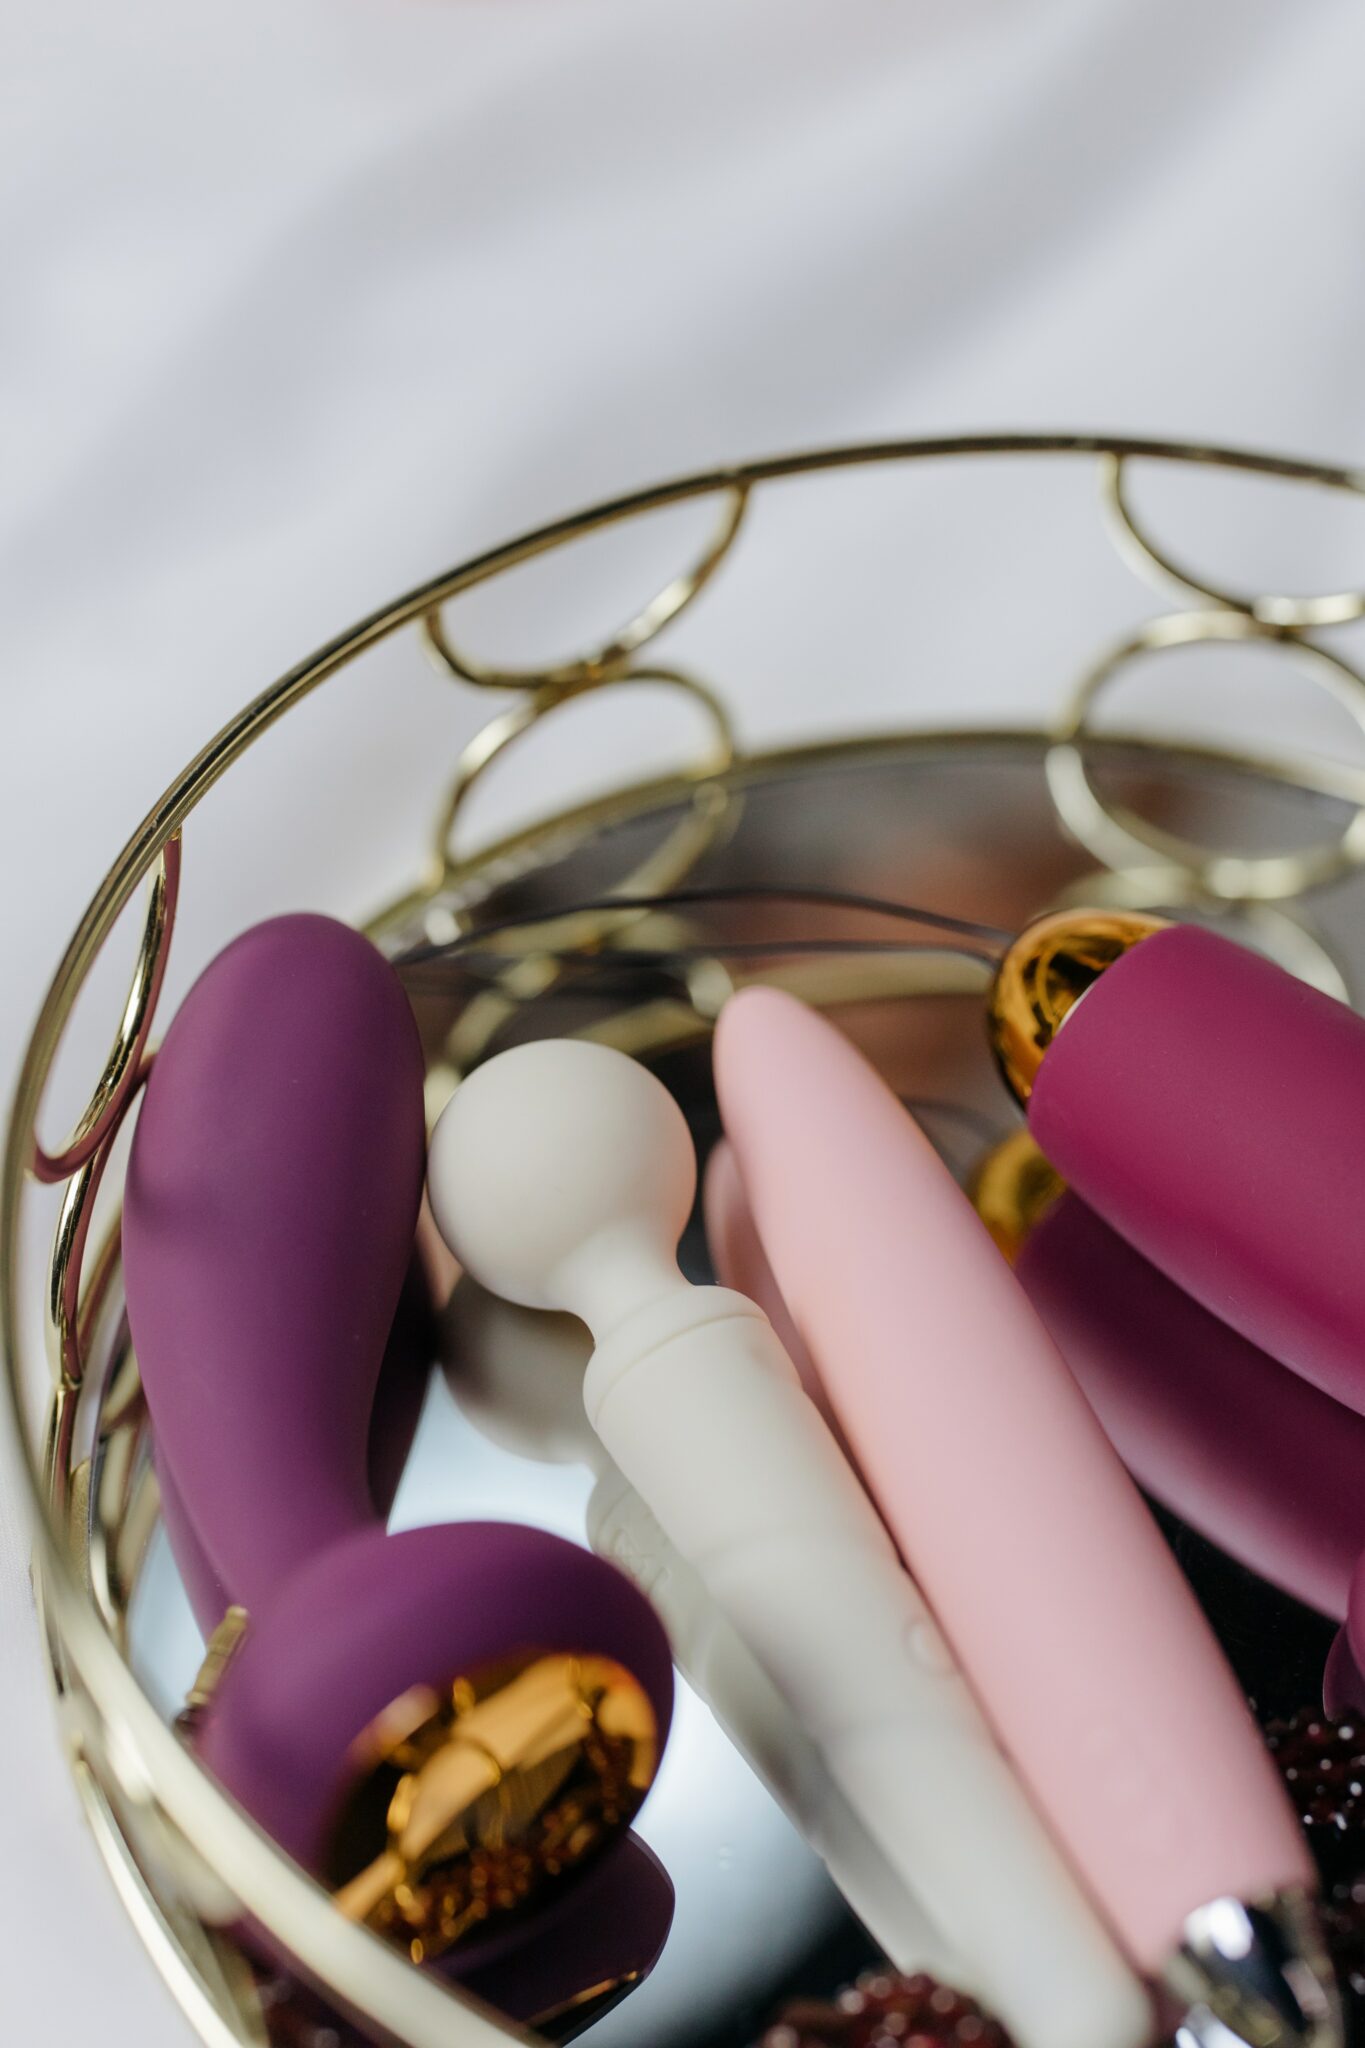 Four pink and purple sex toys in a tray.